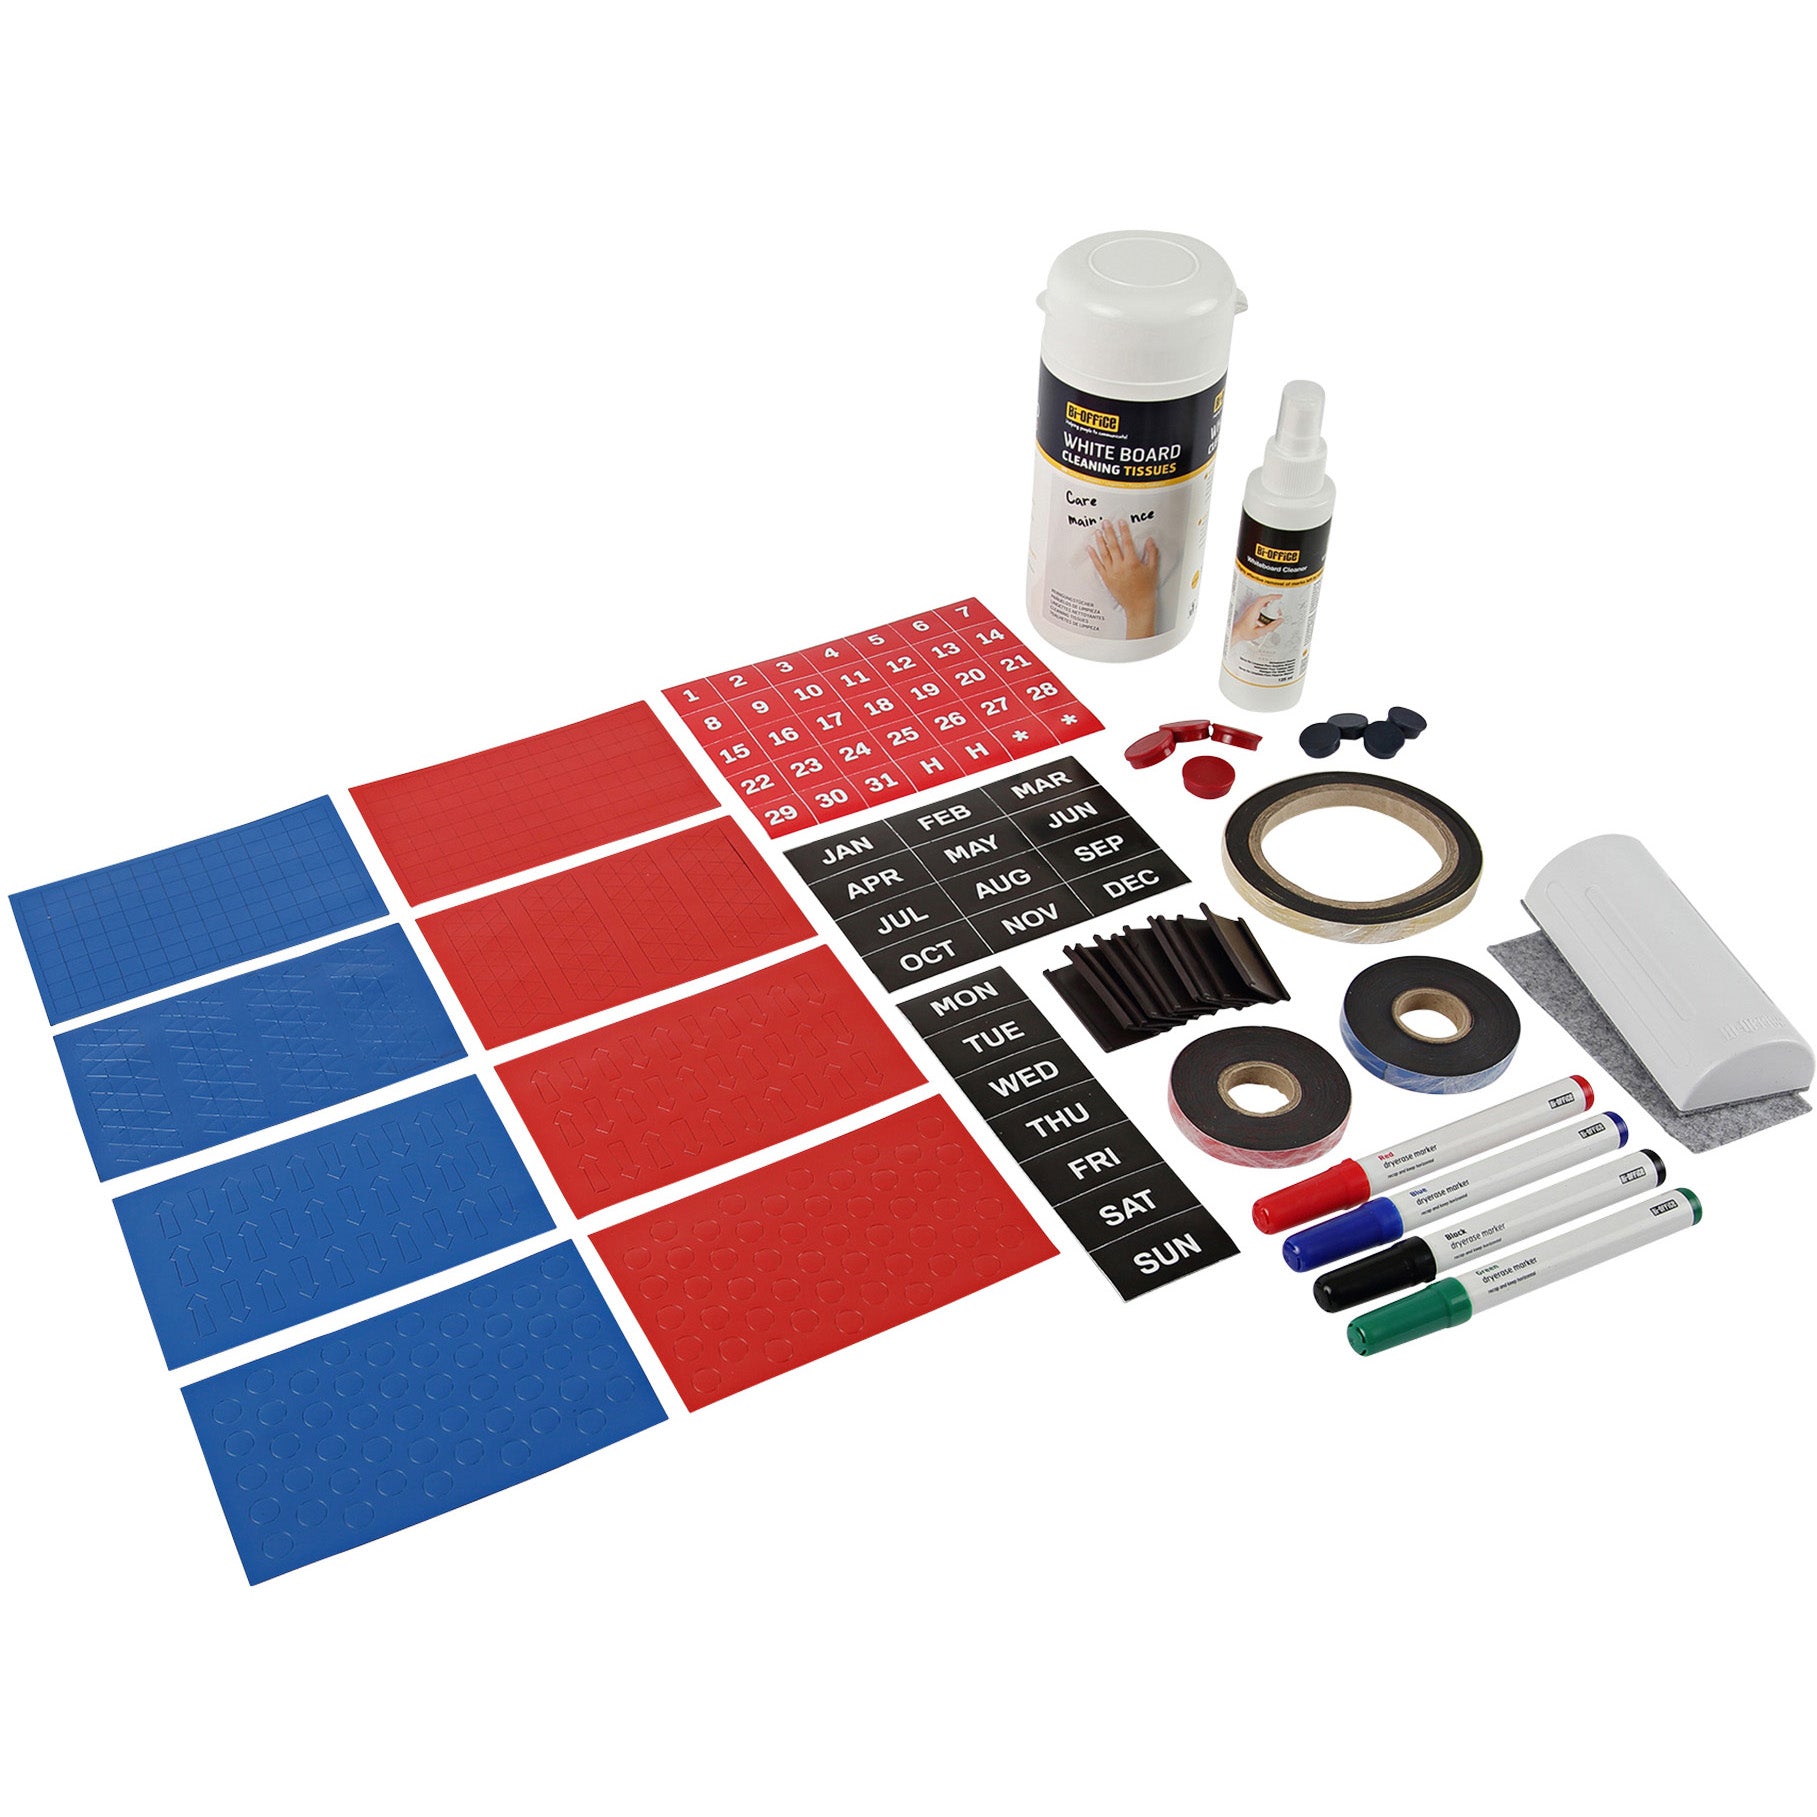 KT1317 Profressional Magnetic Planning & Organization Kit for Whiteboards, Includes Date Magnets, Magnetic Tape, Dry Erase Markers & More by MasterVision